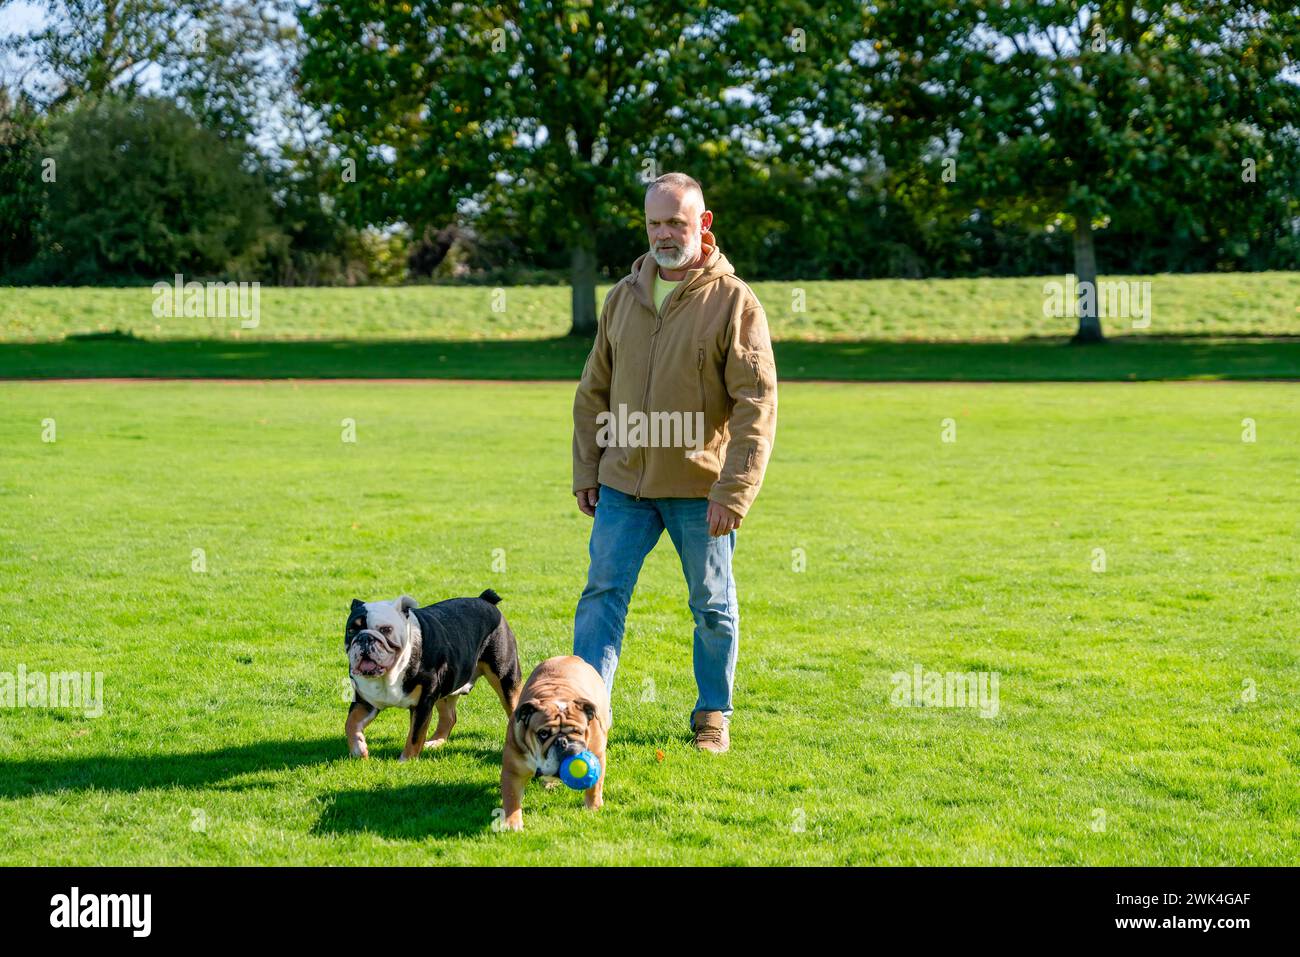 An old man walking with his dog in the park Stock Photo